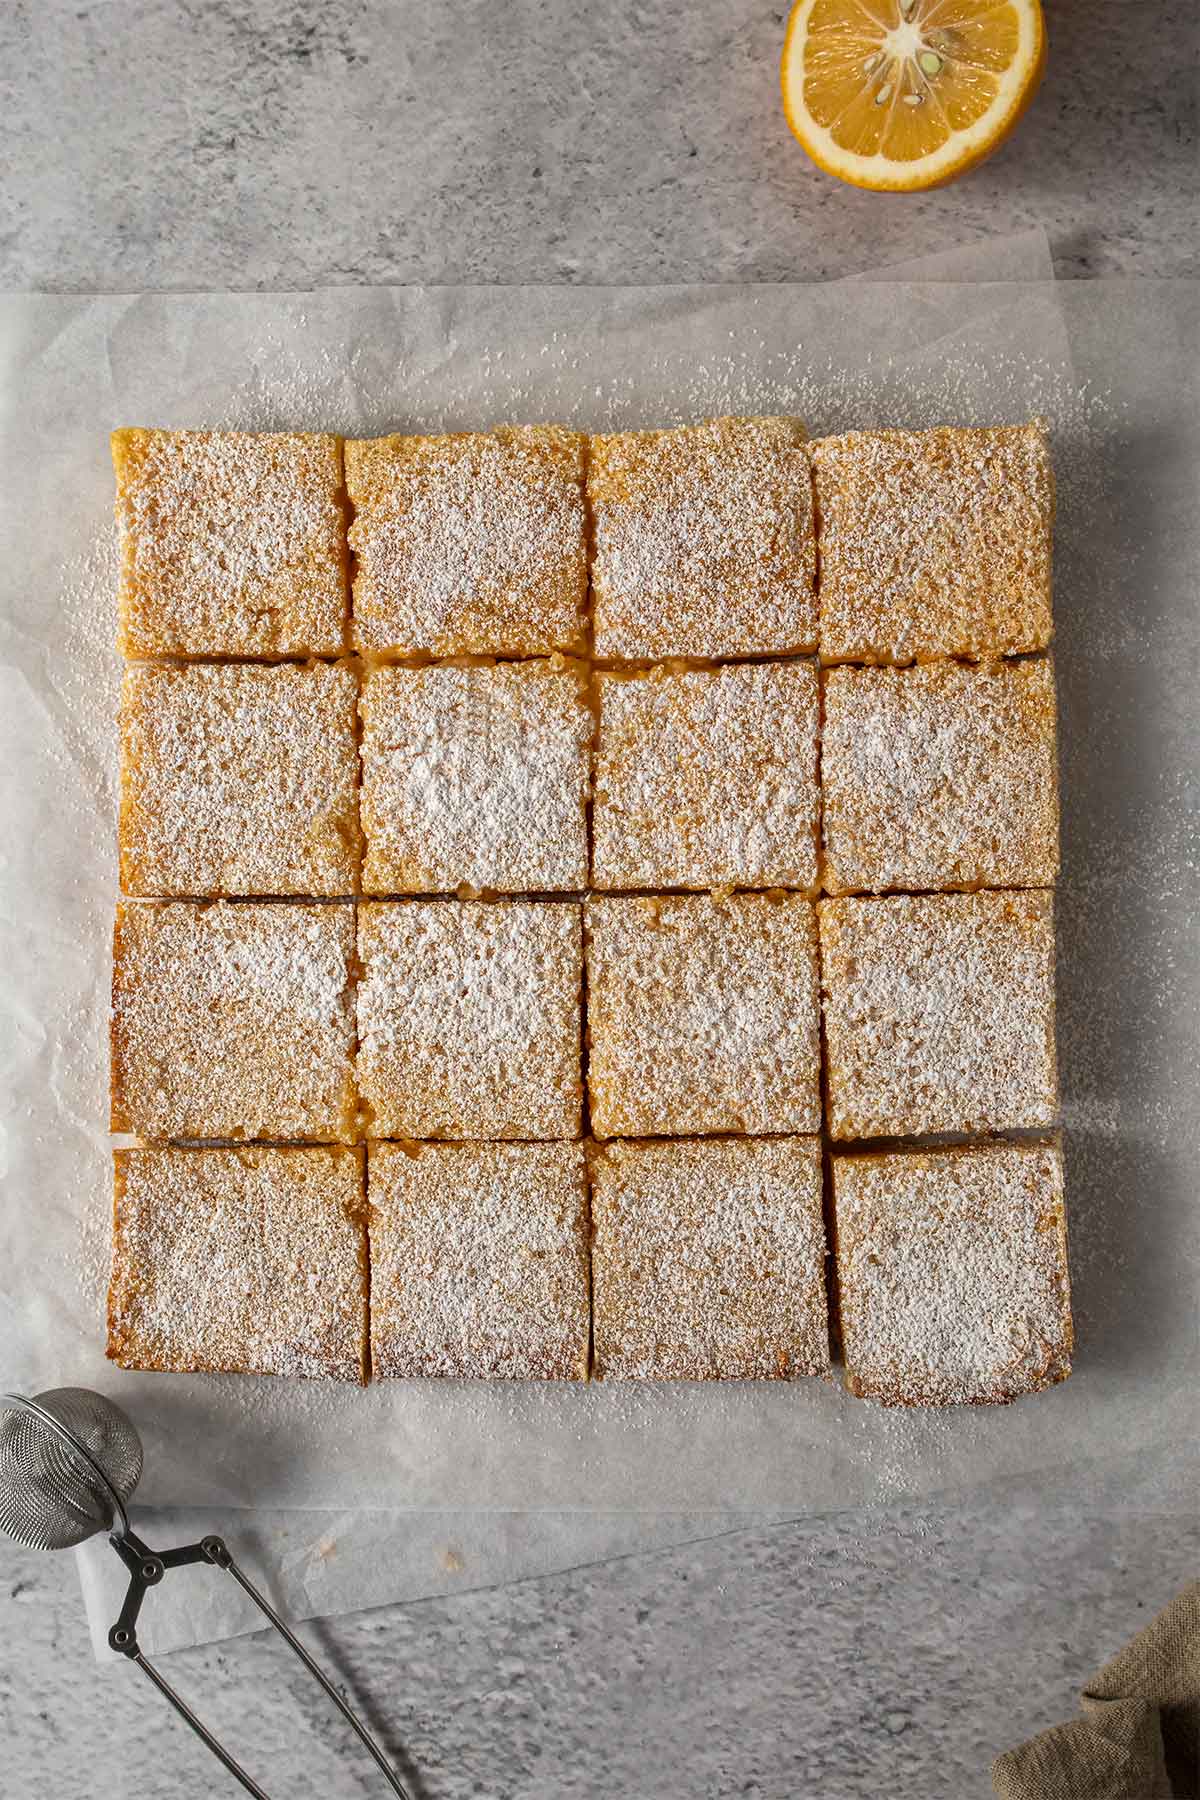 Sliced lemon slice on parchment paper dusted with icing sugar.